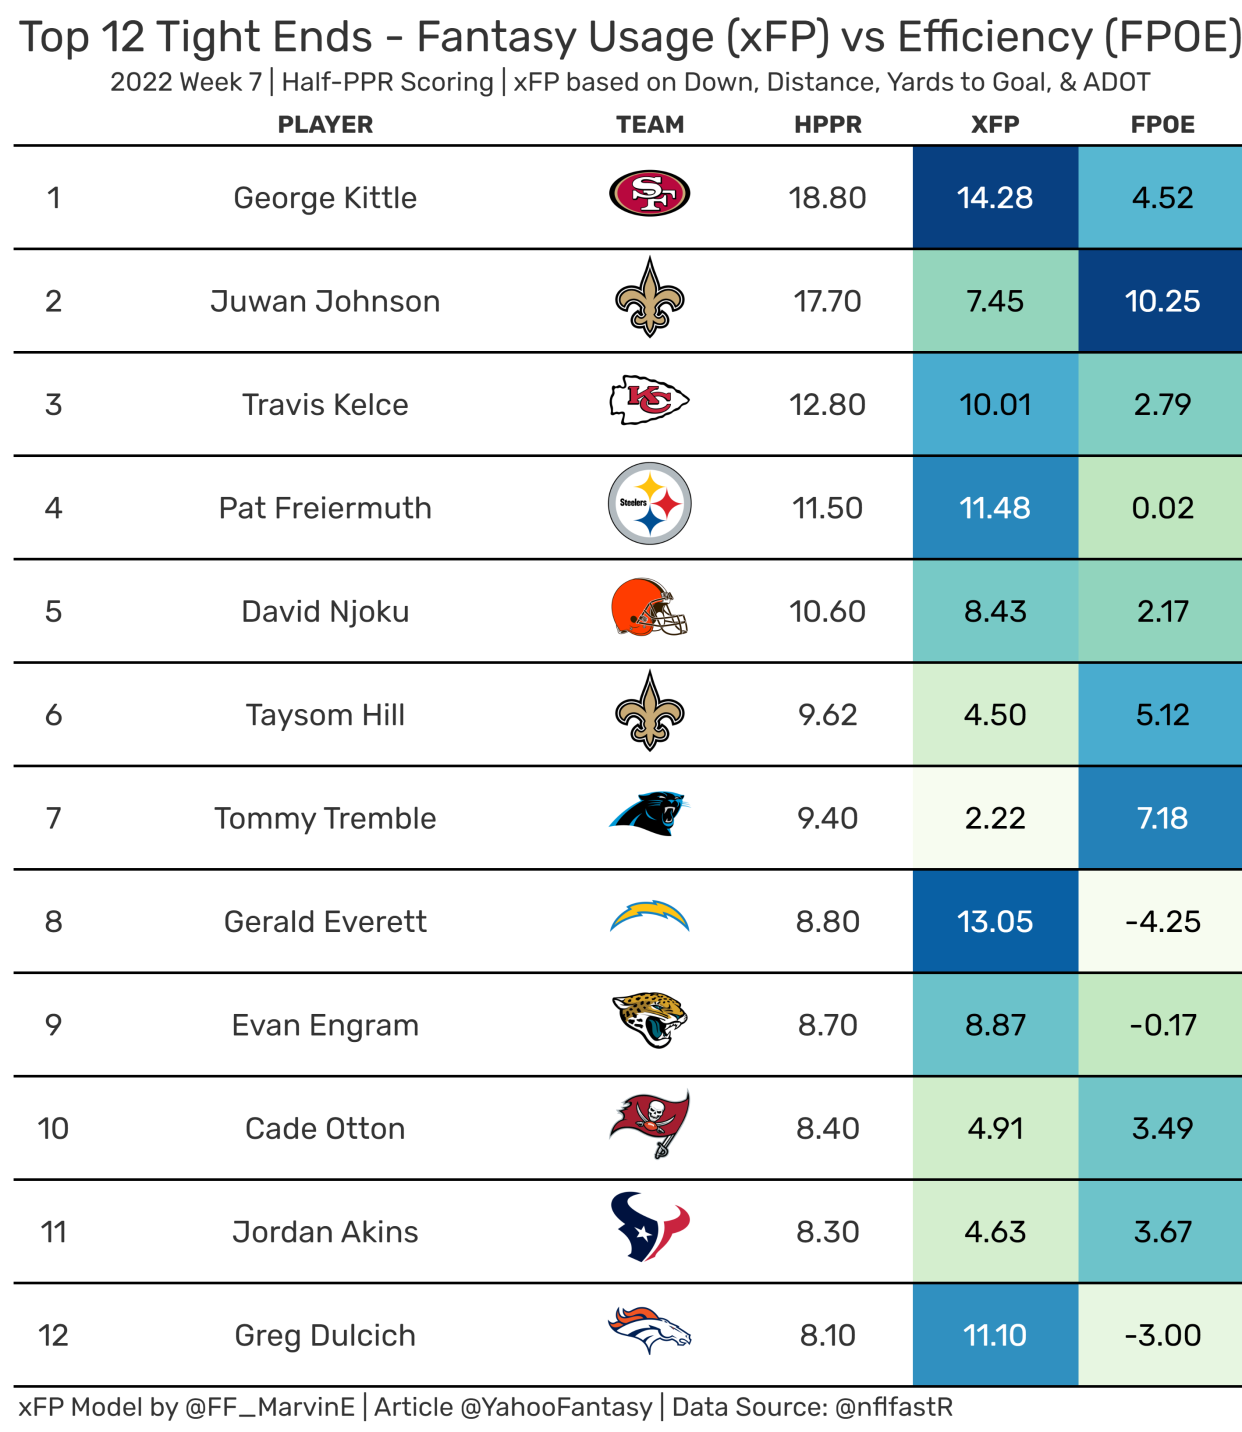 Top-12 Fantasy Tight Ends from Week 7. (Data used provided by nflfastR)